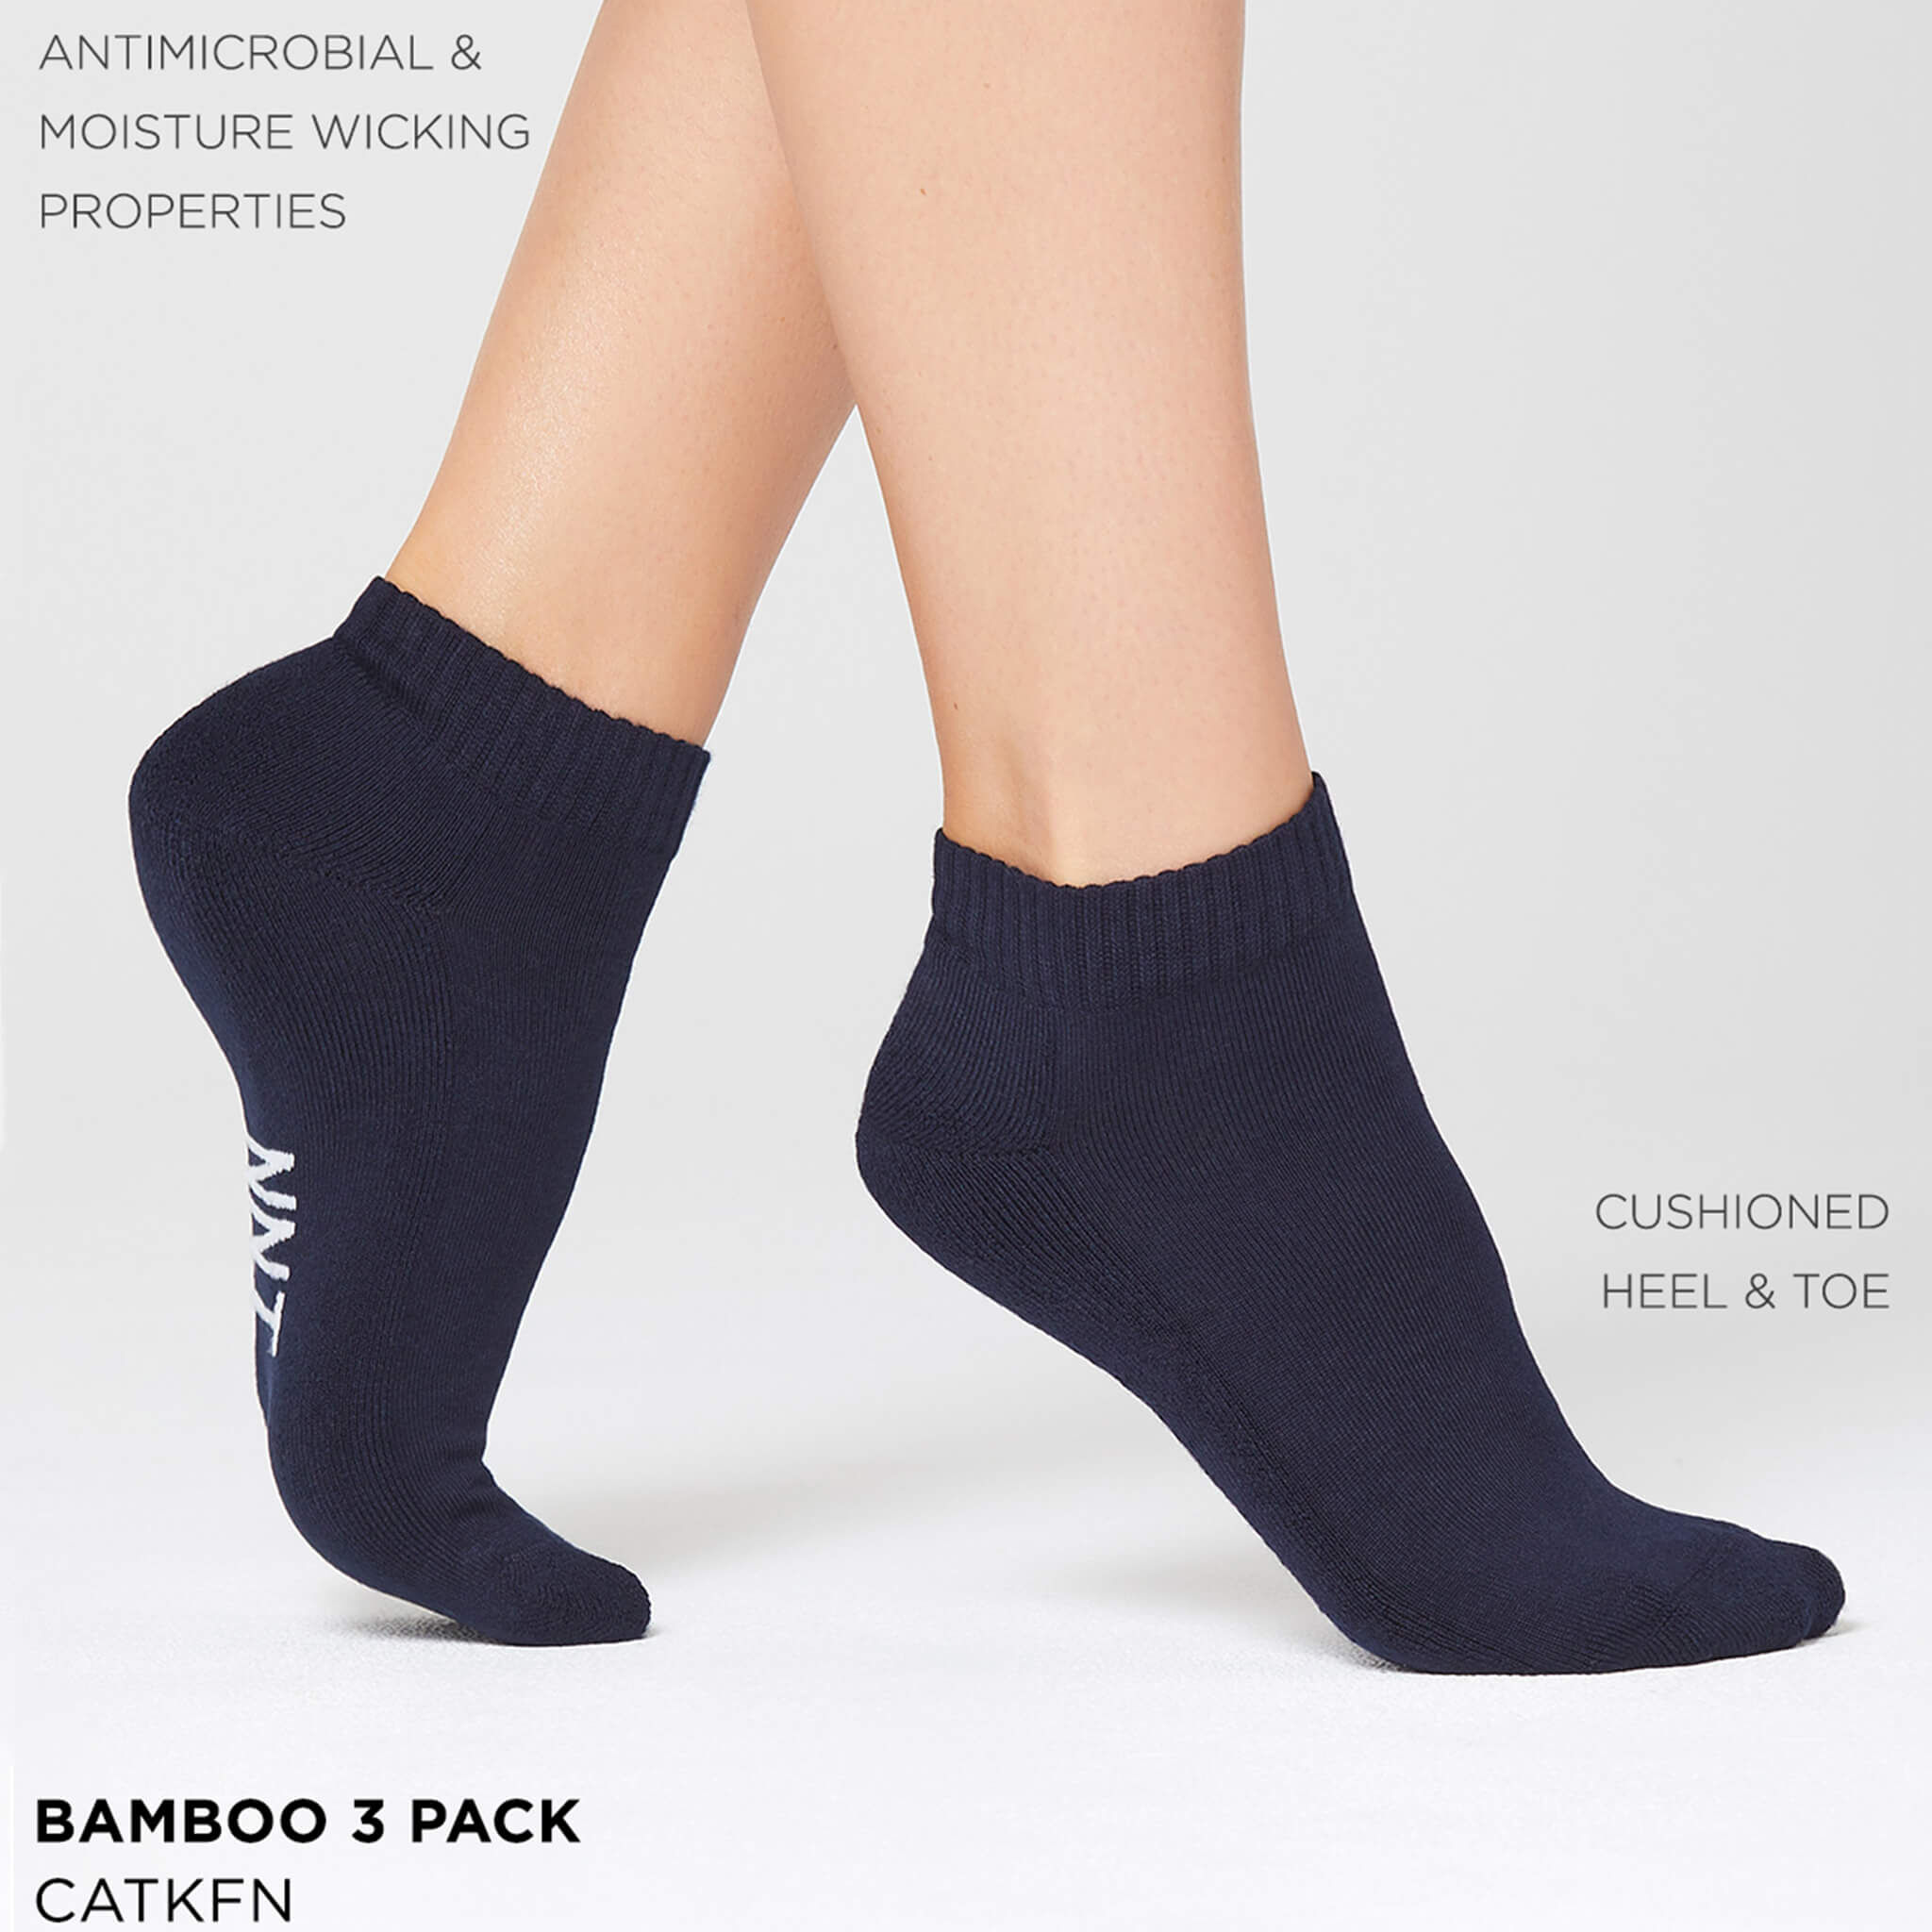 Bamboo 3 Pack